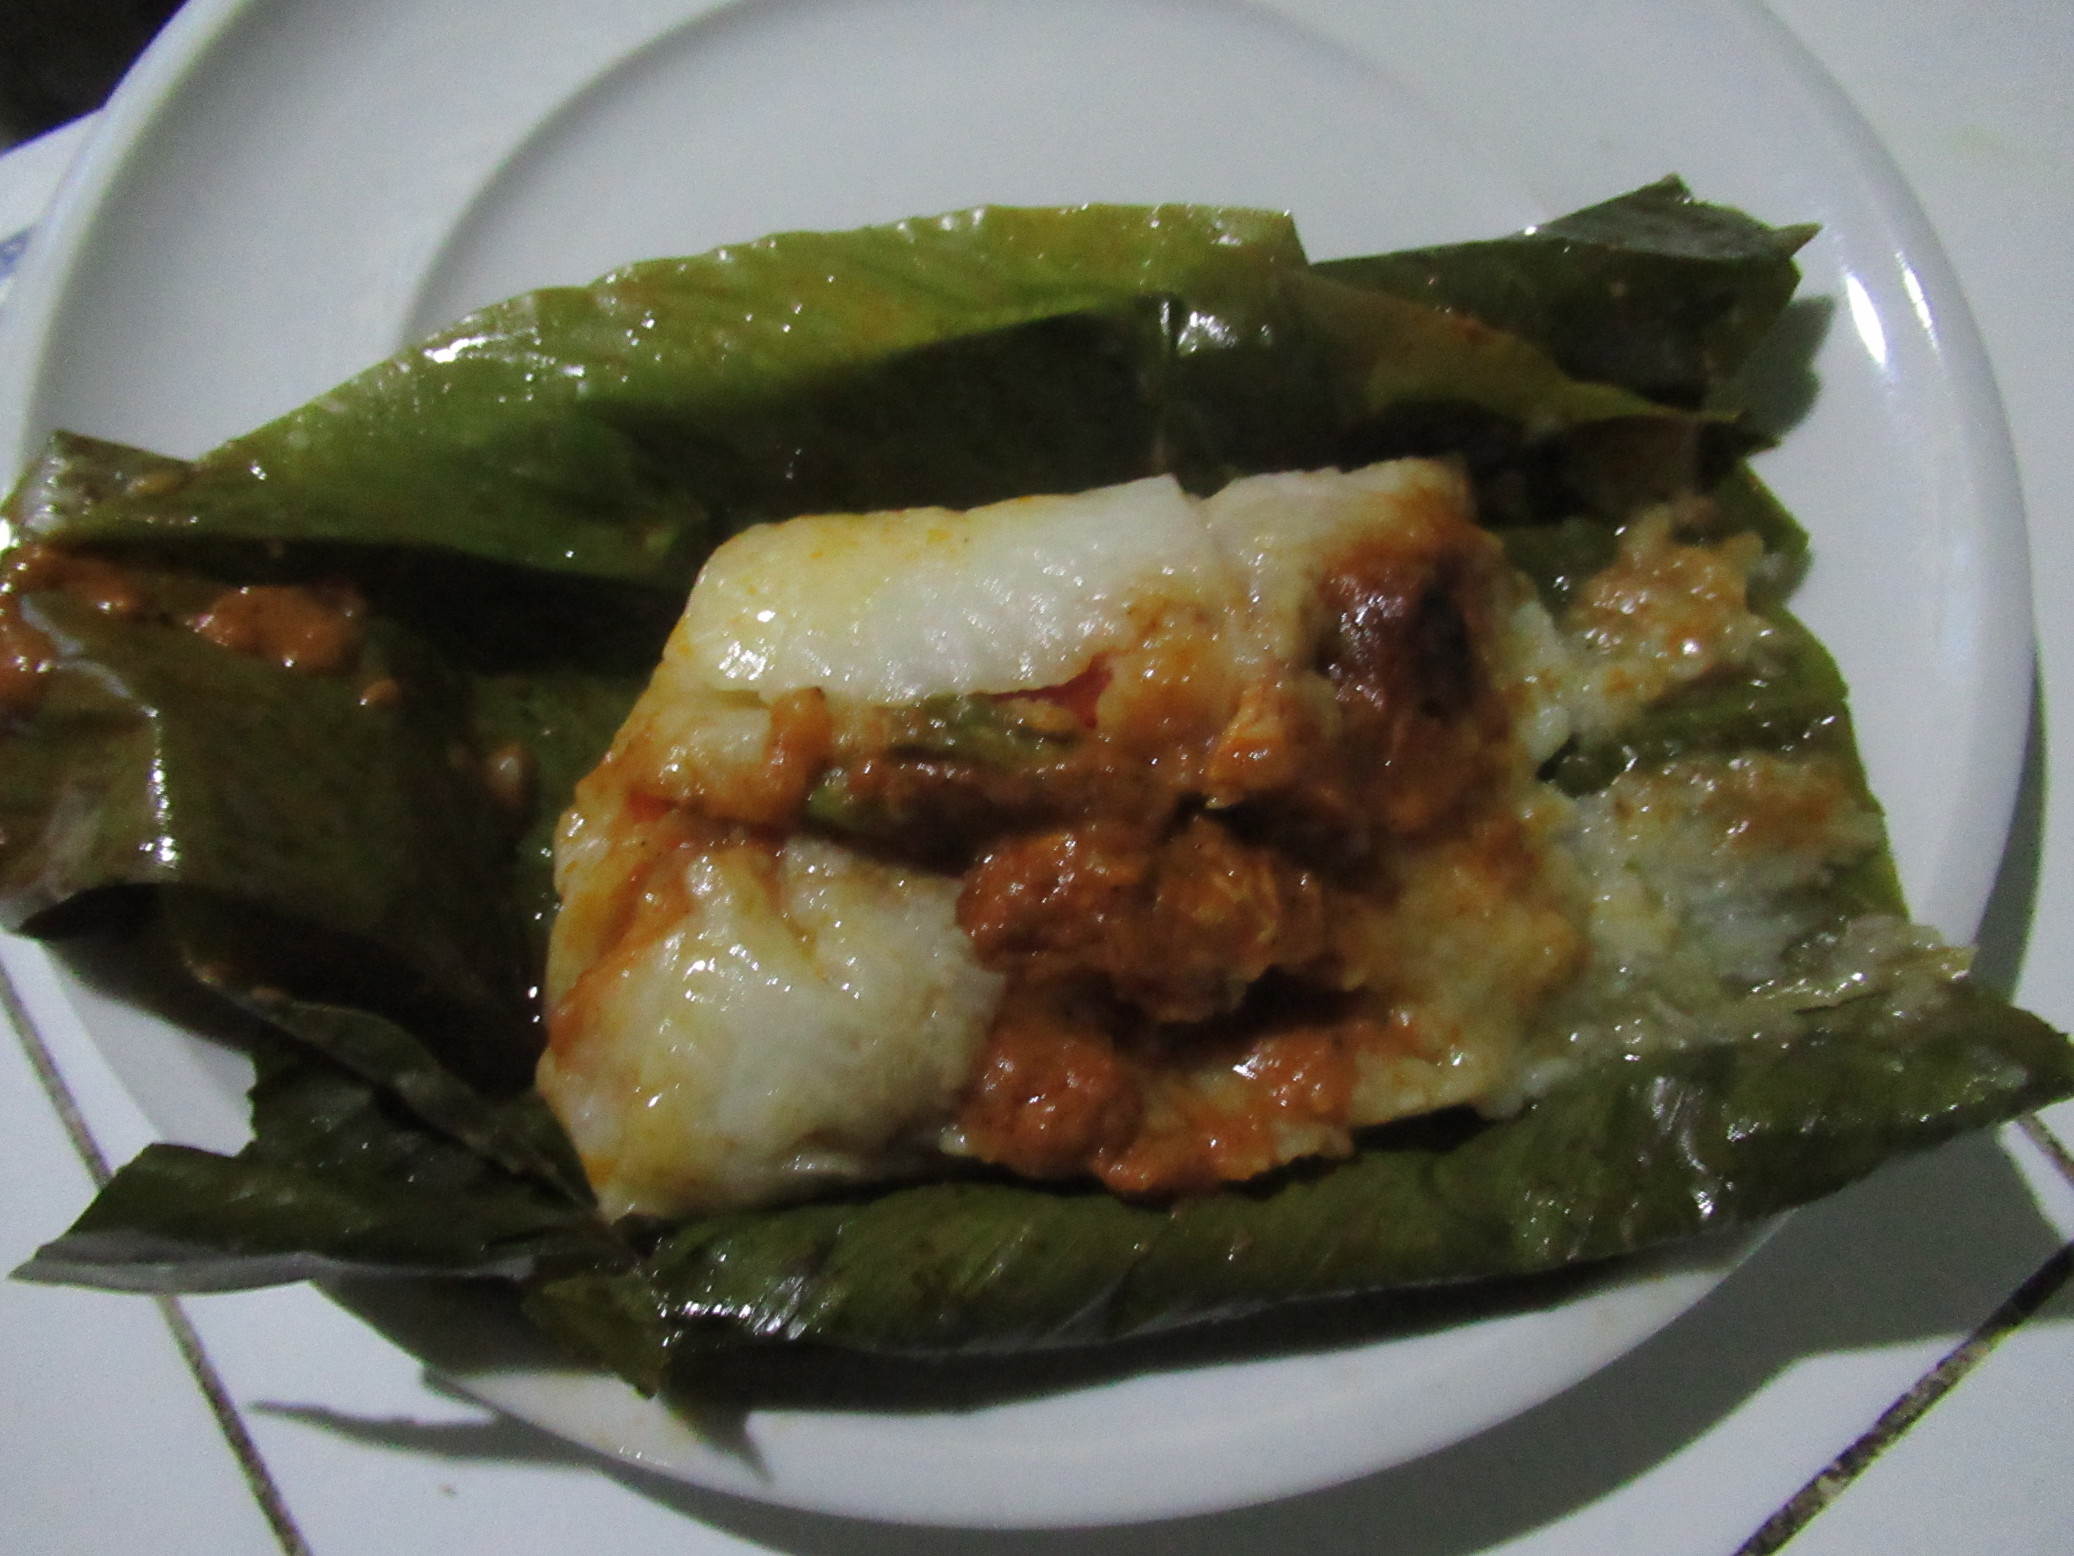 a cooked tamale